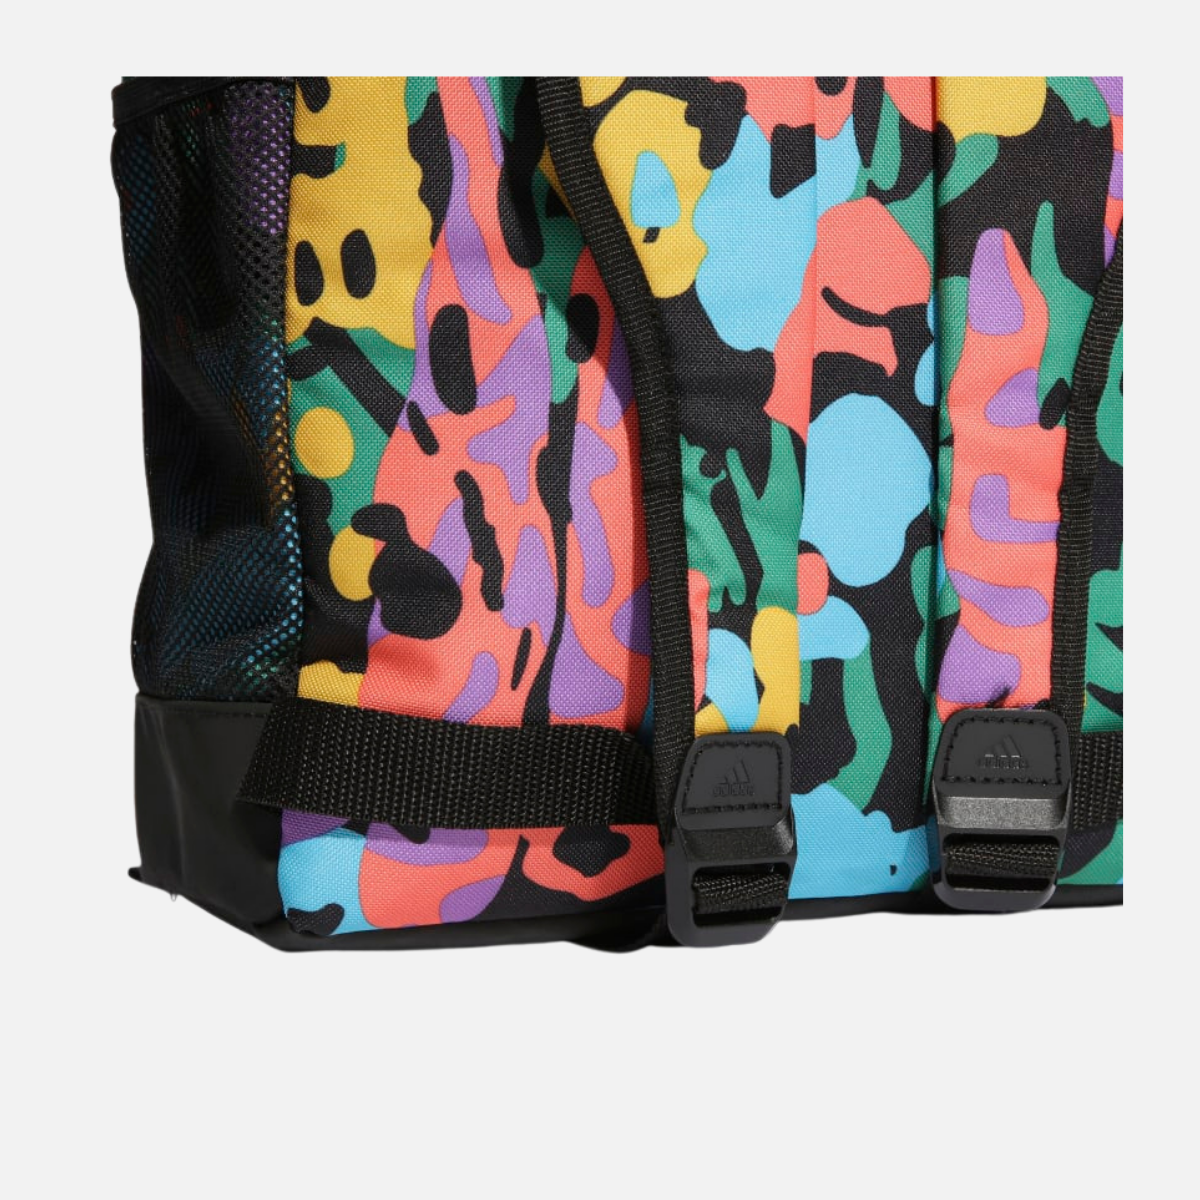 Adidas Brand with the 3 Strips Backpack -Multicolor / Black / White